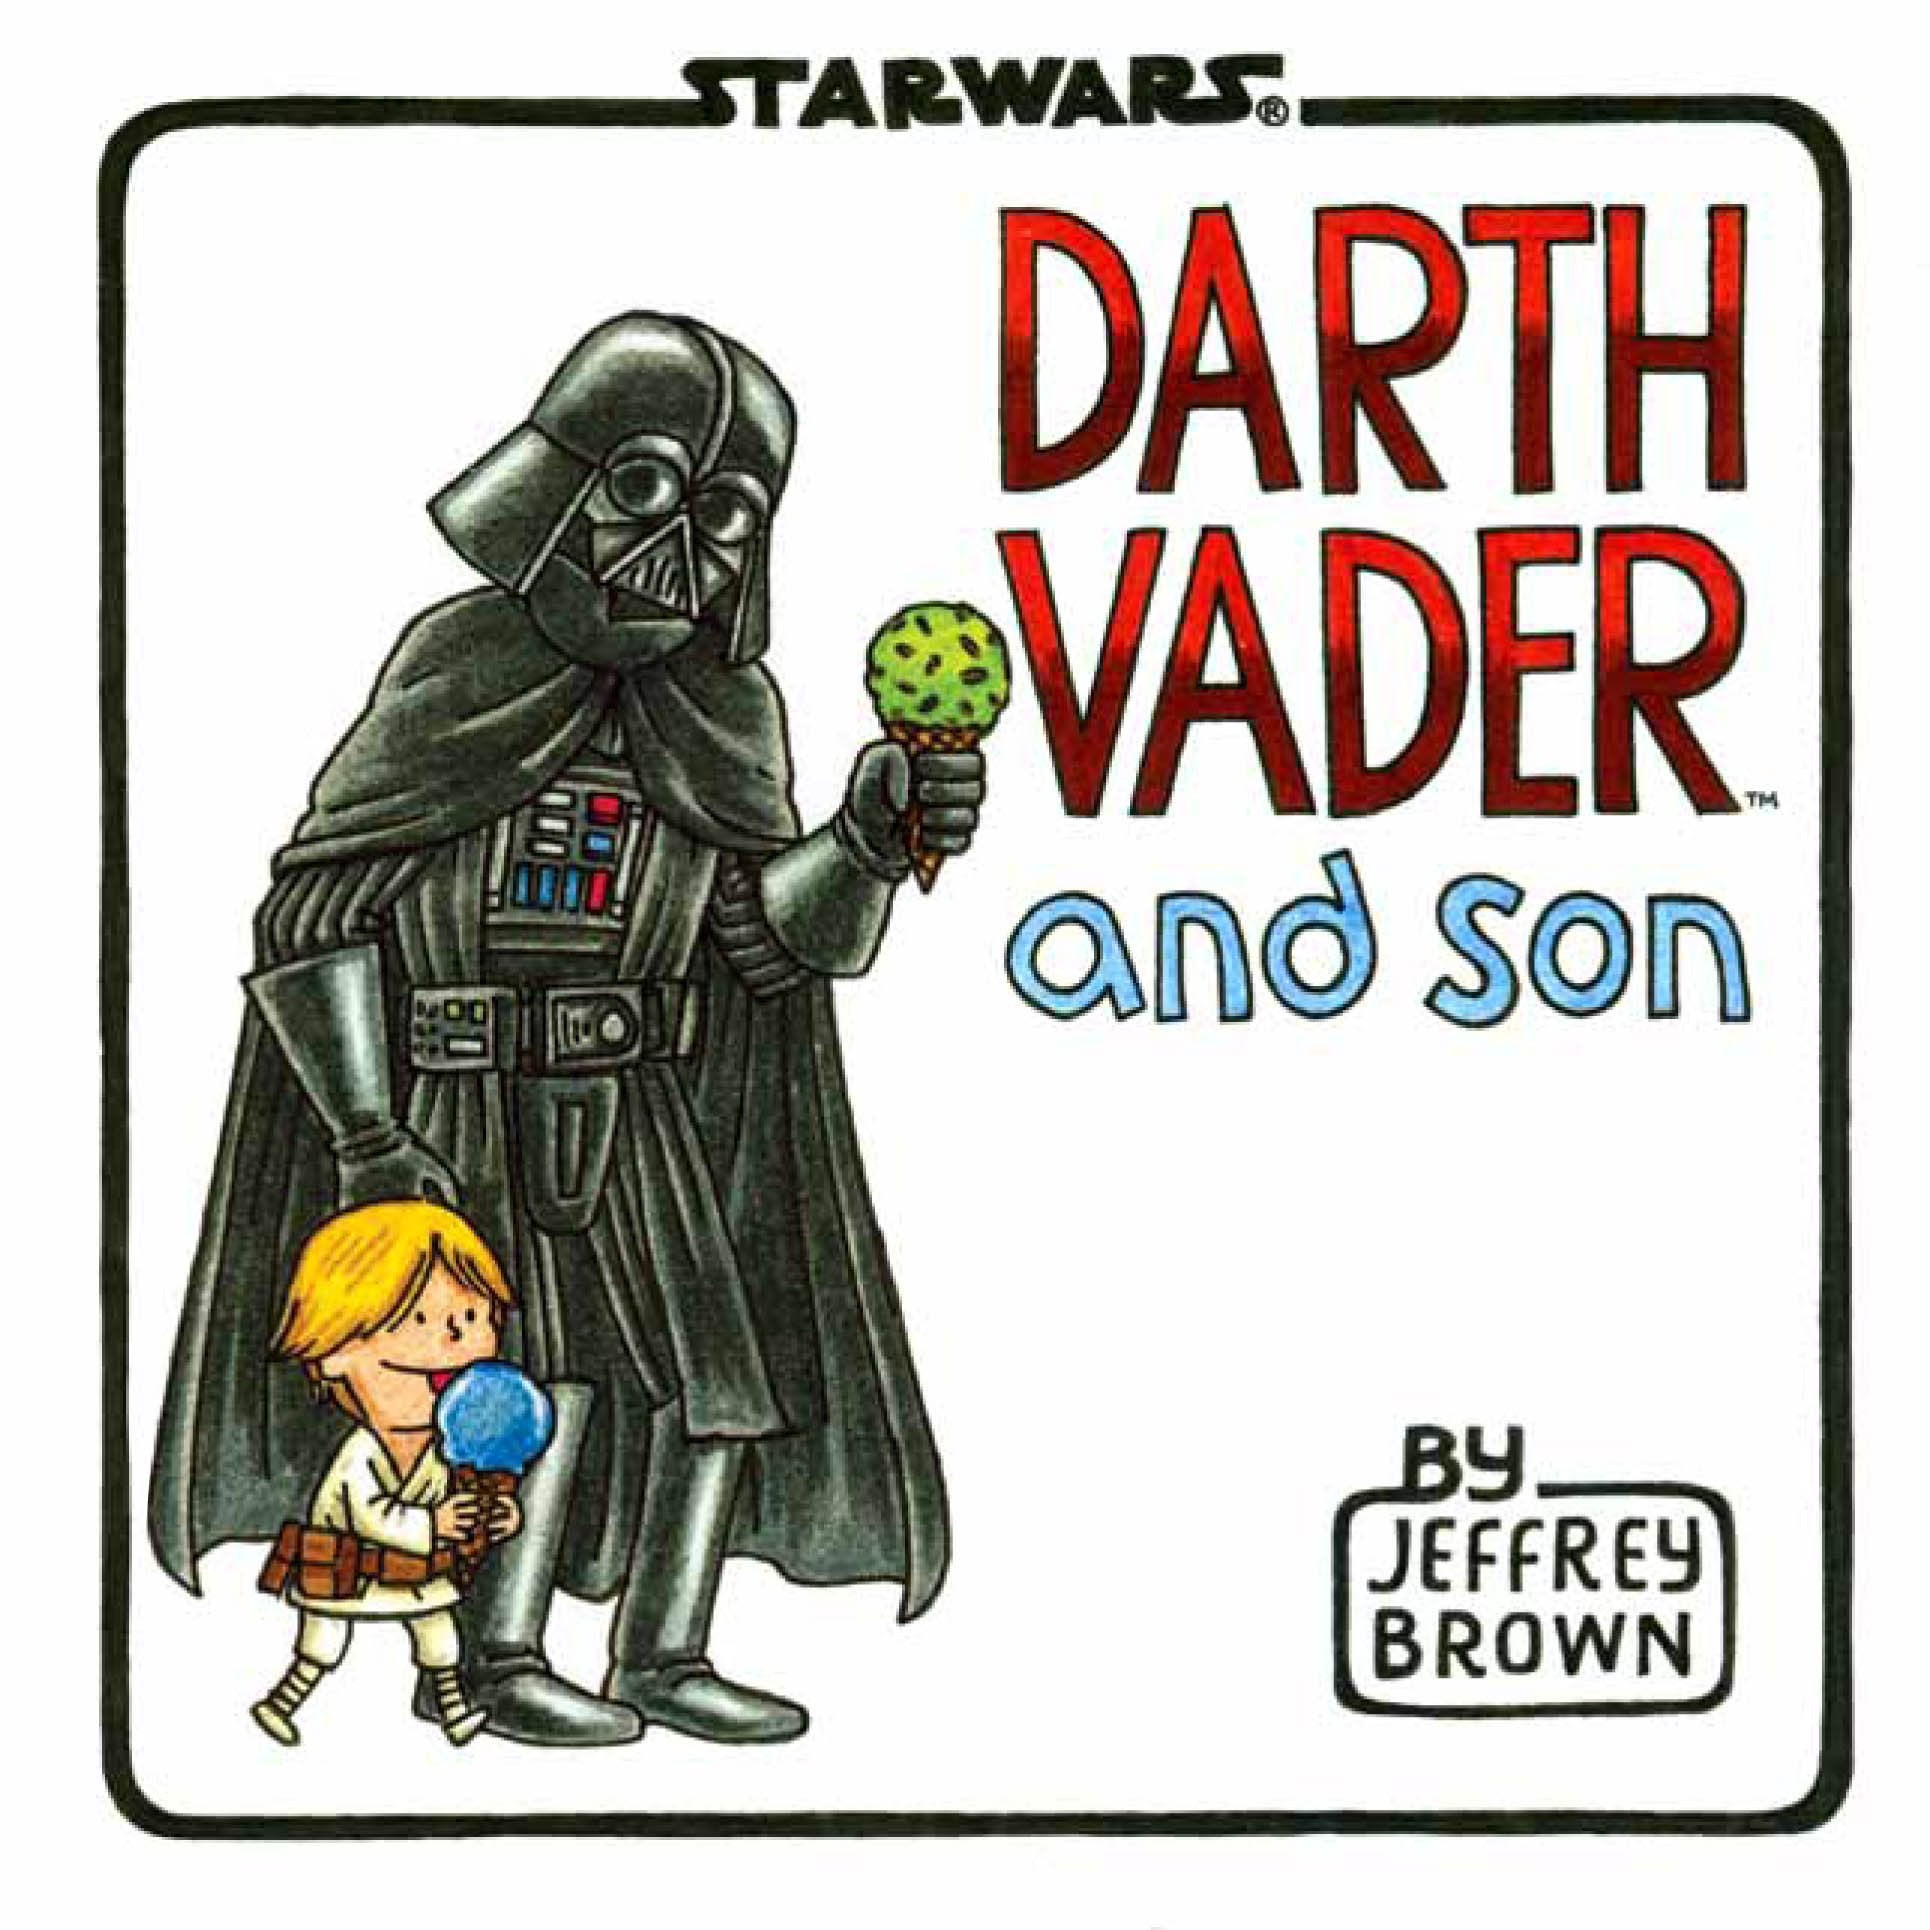 Cover of Darth Vader and son by Jeffrey Brown